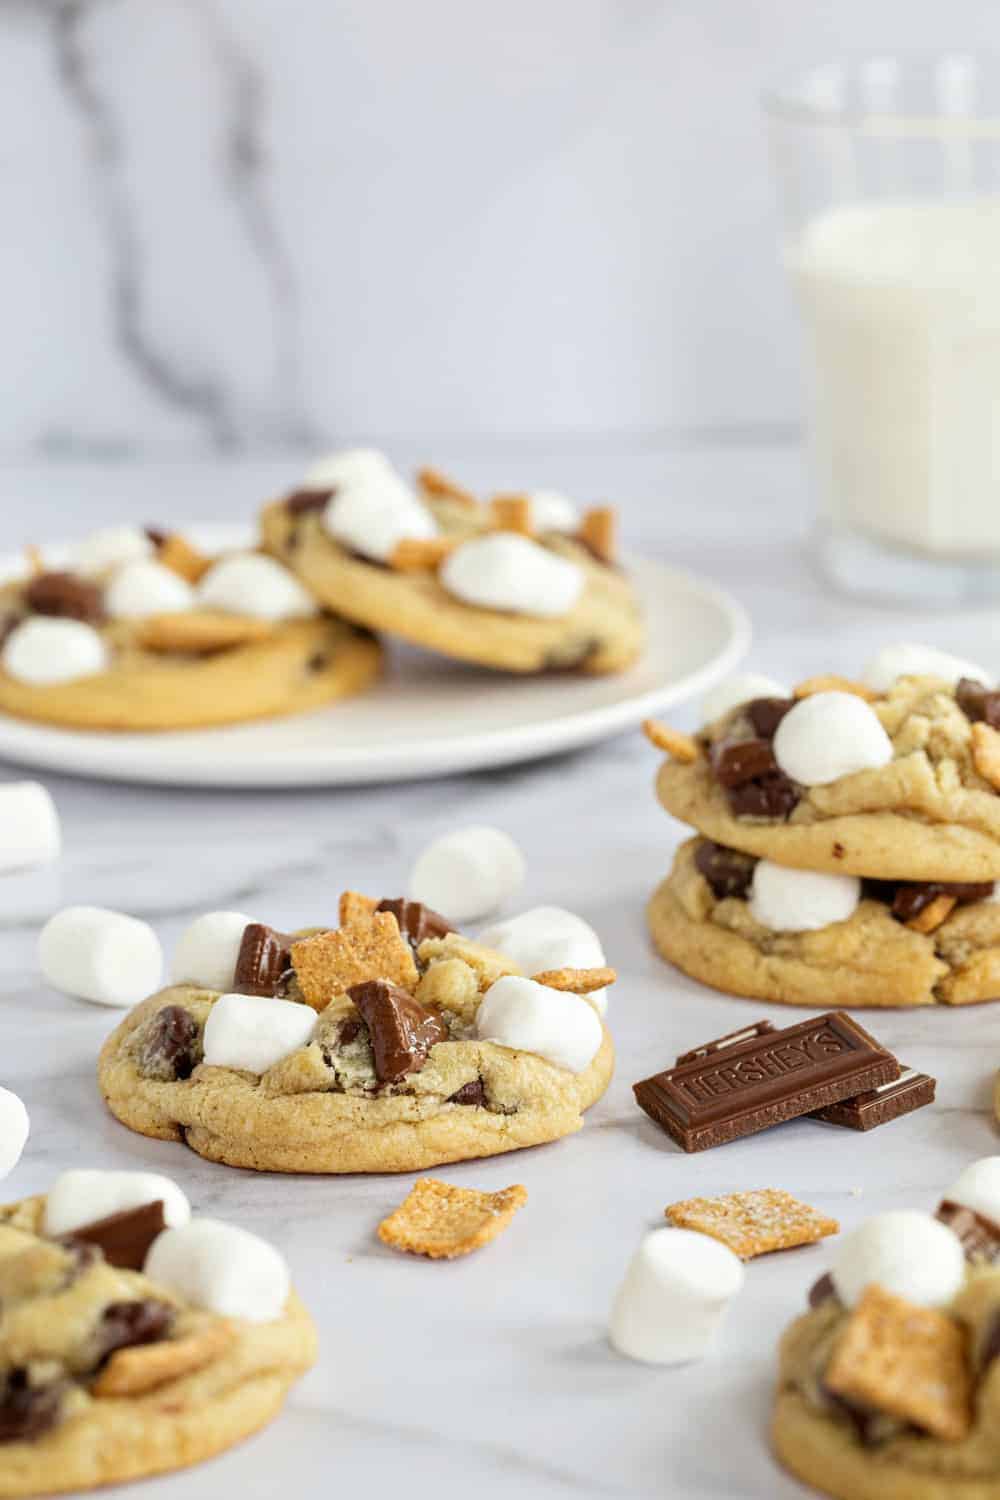 Plate of s'mores cookies in the background with more cookies in the foreground on a marble surface